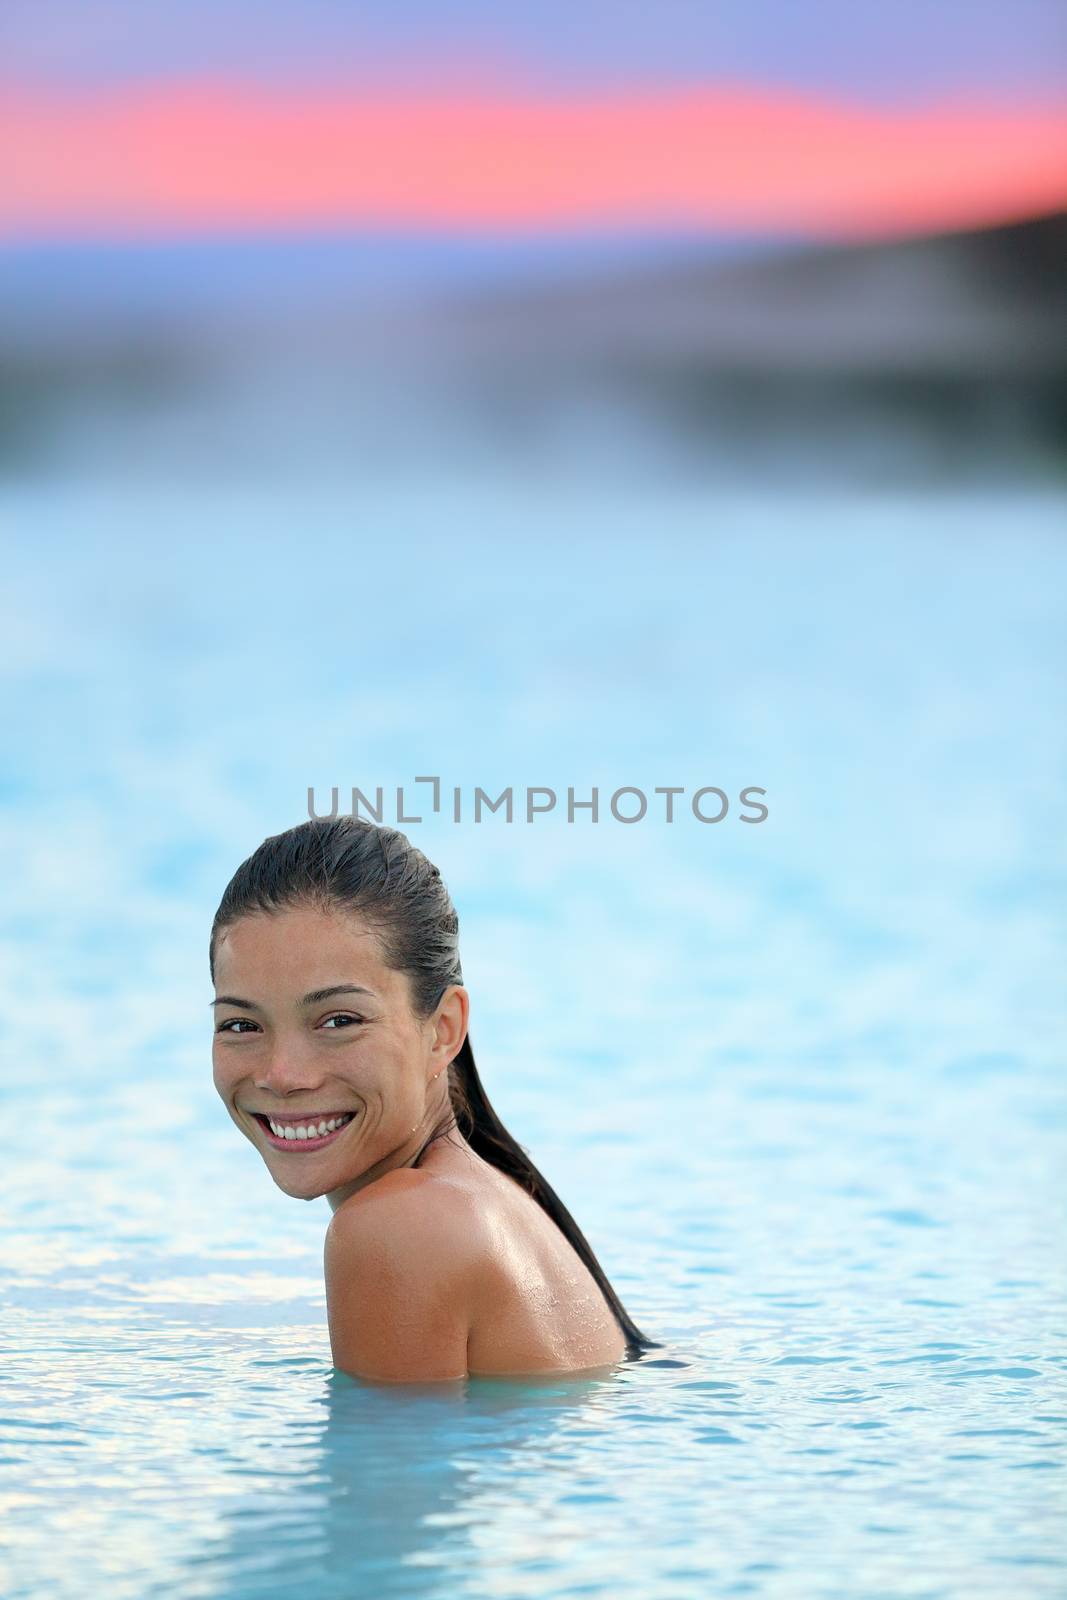 Geothermal spa. Woman relaxing in hot spring pool on Iceland. Girl enjoying bathing in a blue water lagoon Icelandic tourist attraction. Portrait of mixed race Asian Caucasian female model at sunset.